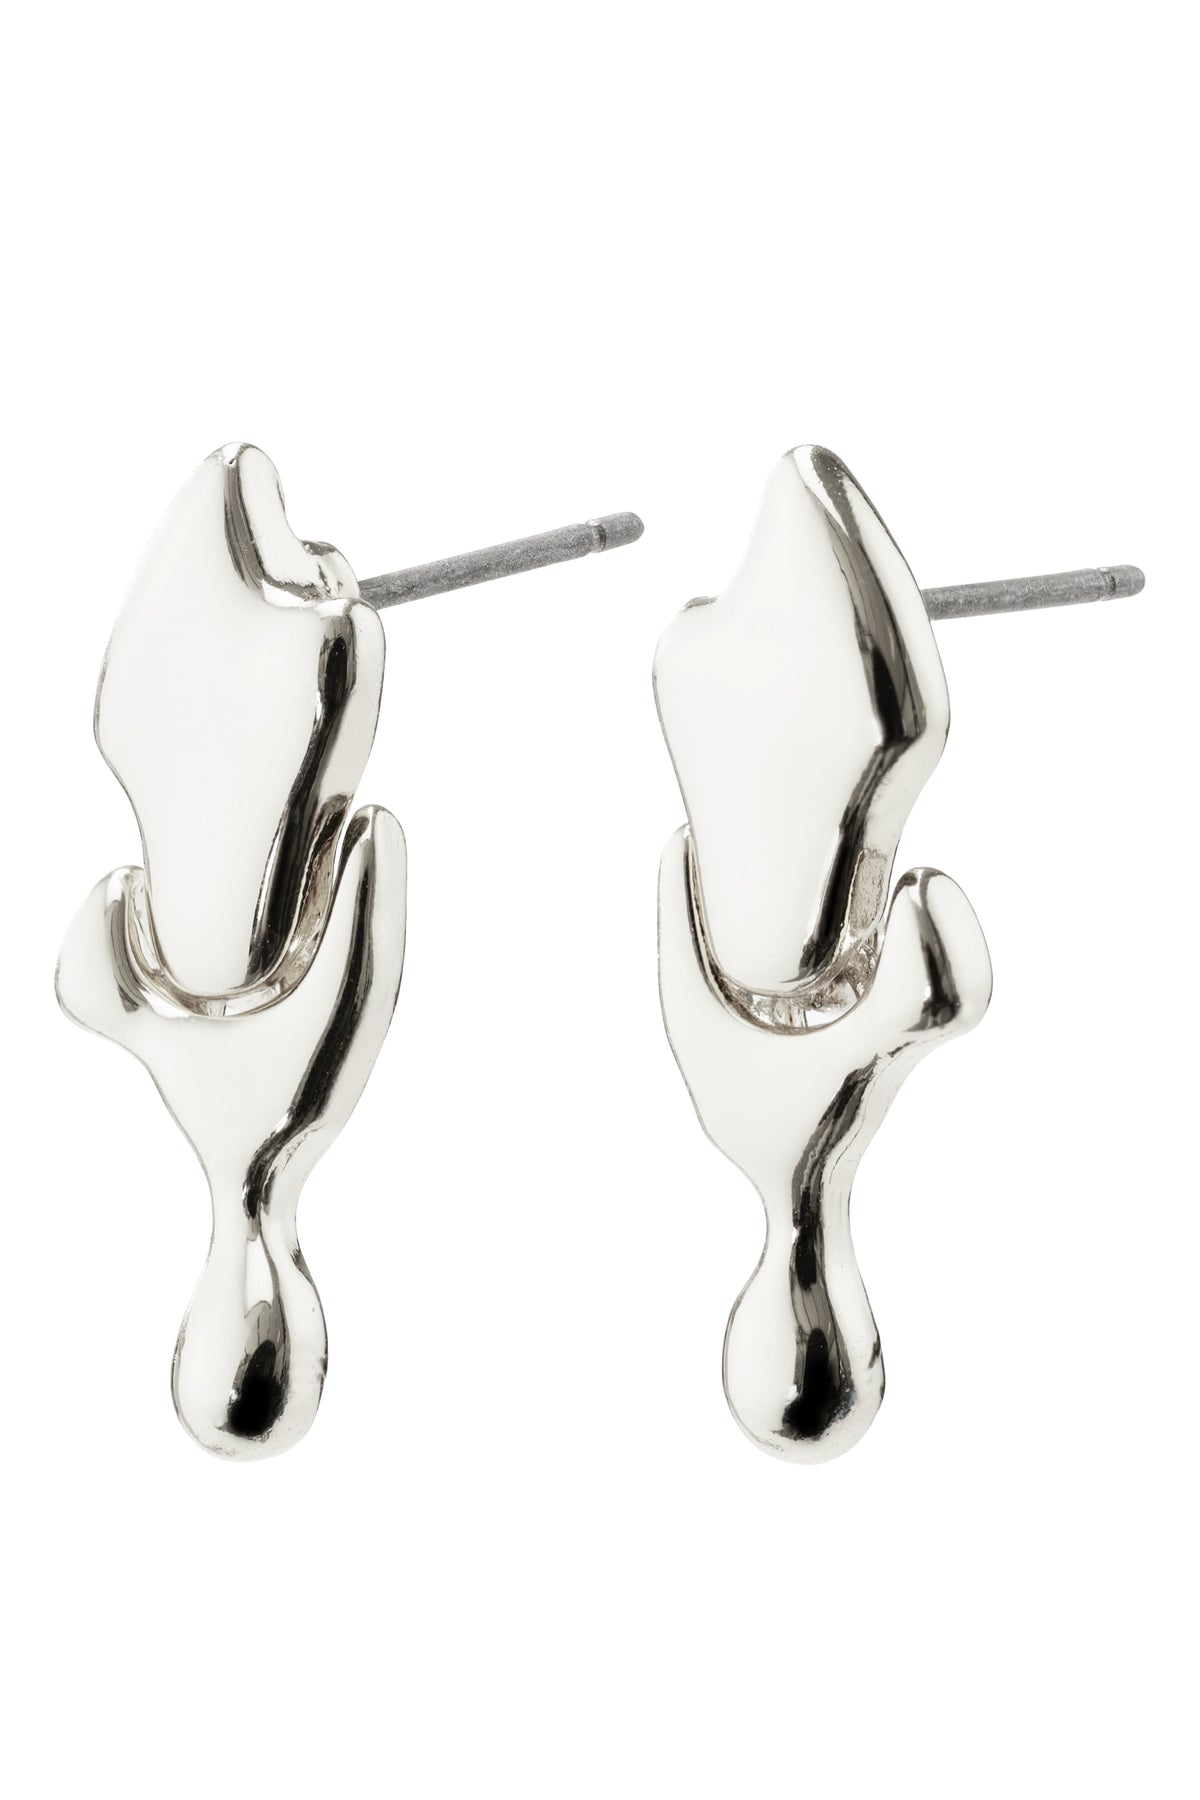 Alyssa Recycled Earrings - Silver Plated